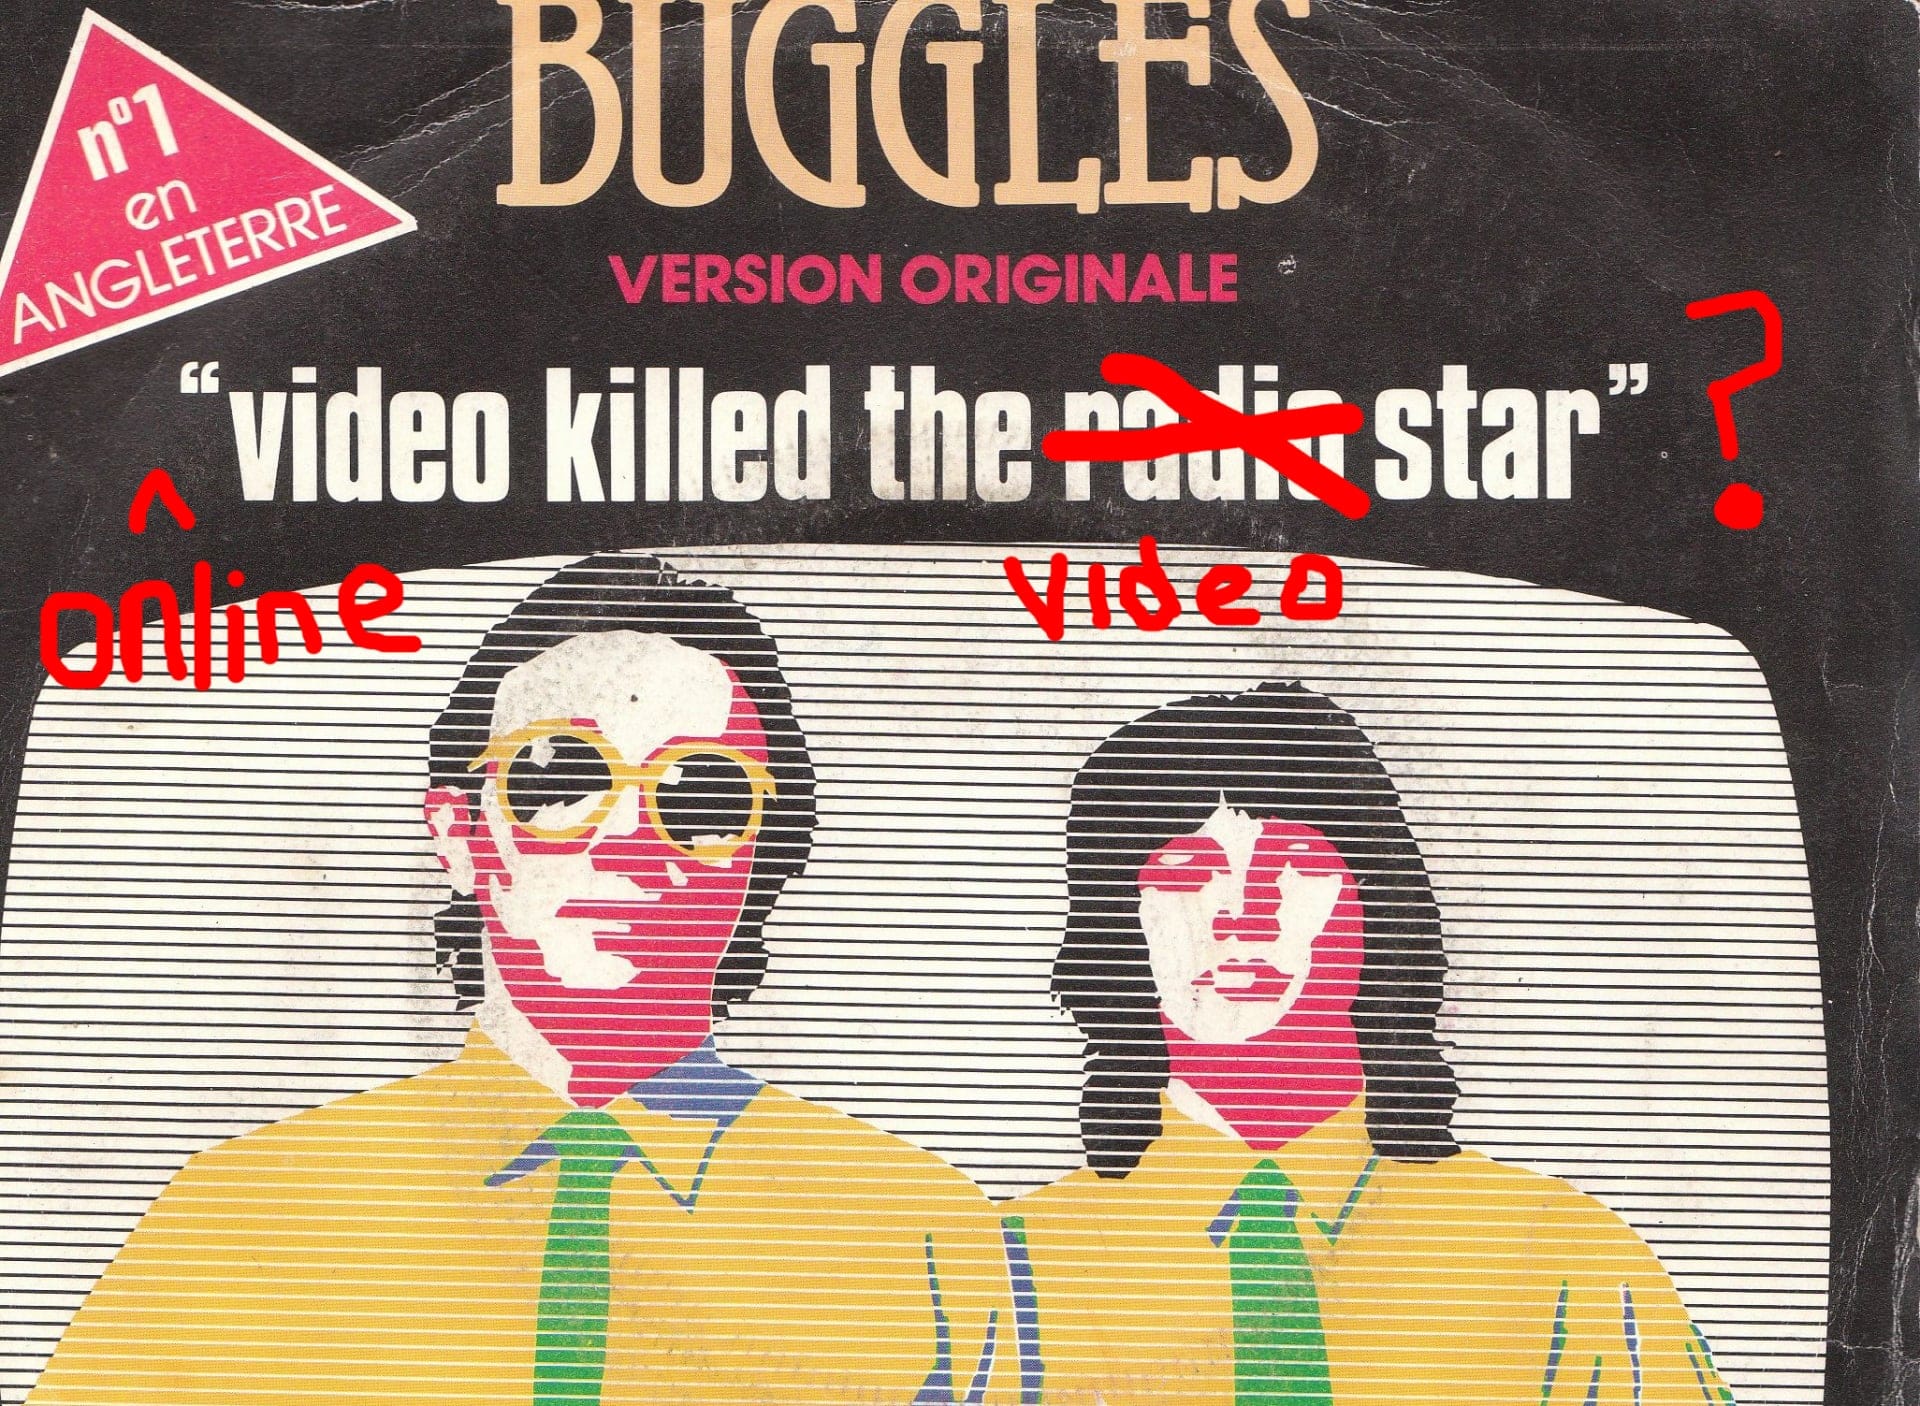 online video killed the video star